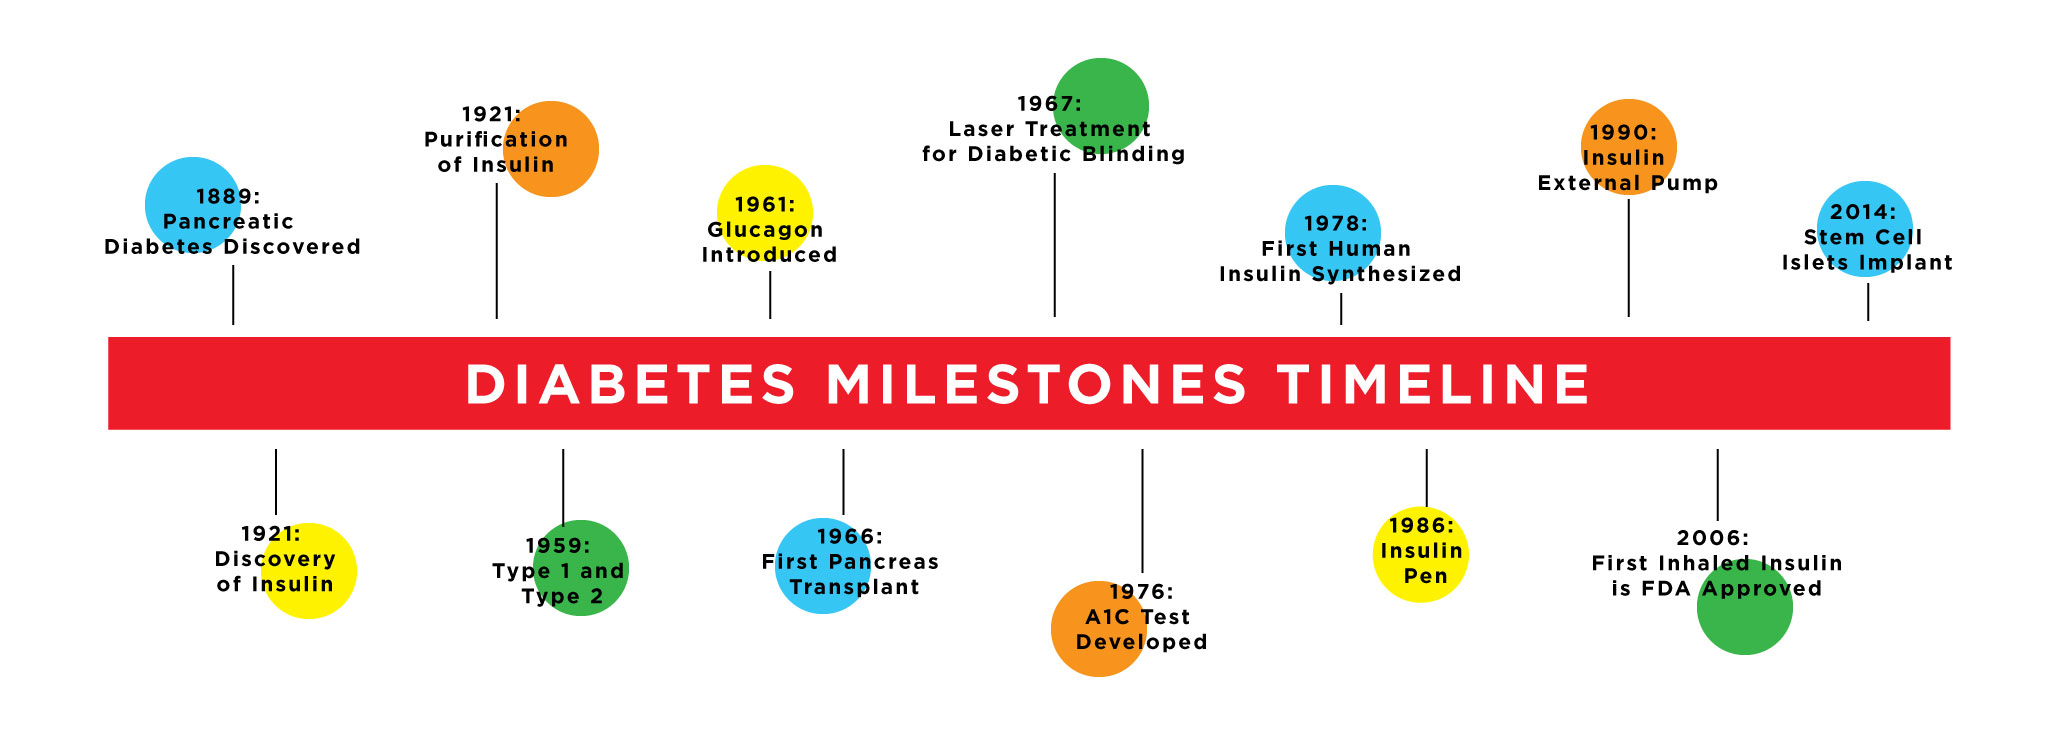 Next Stop Cure? A Quick History of Diabetes Research